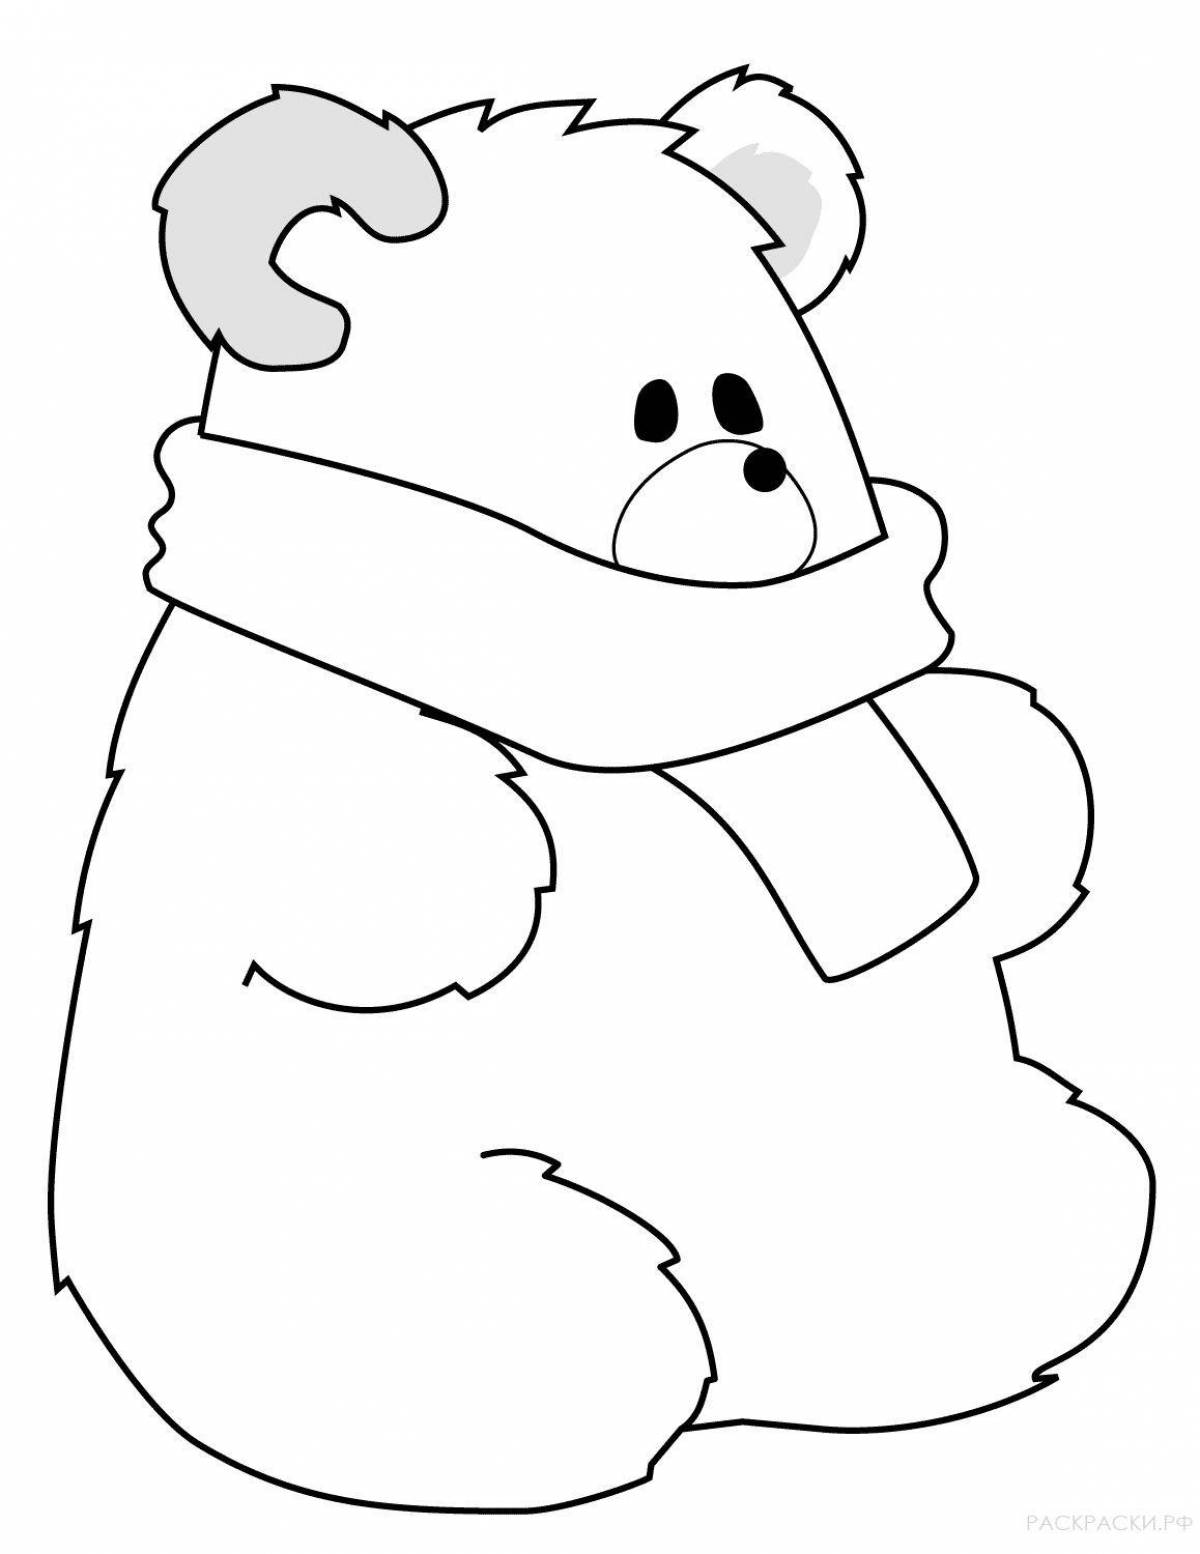 Cute and adorable teddy bear coloring book